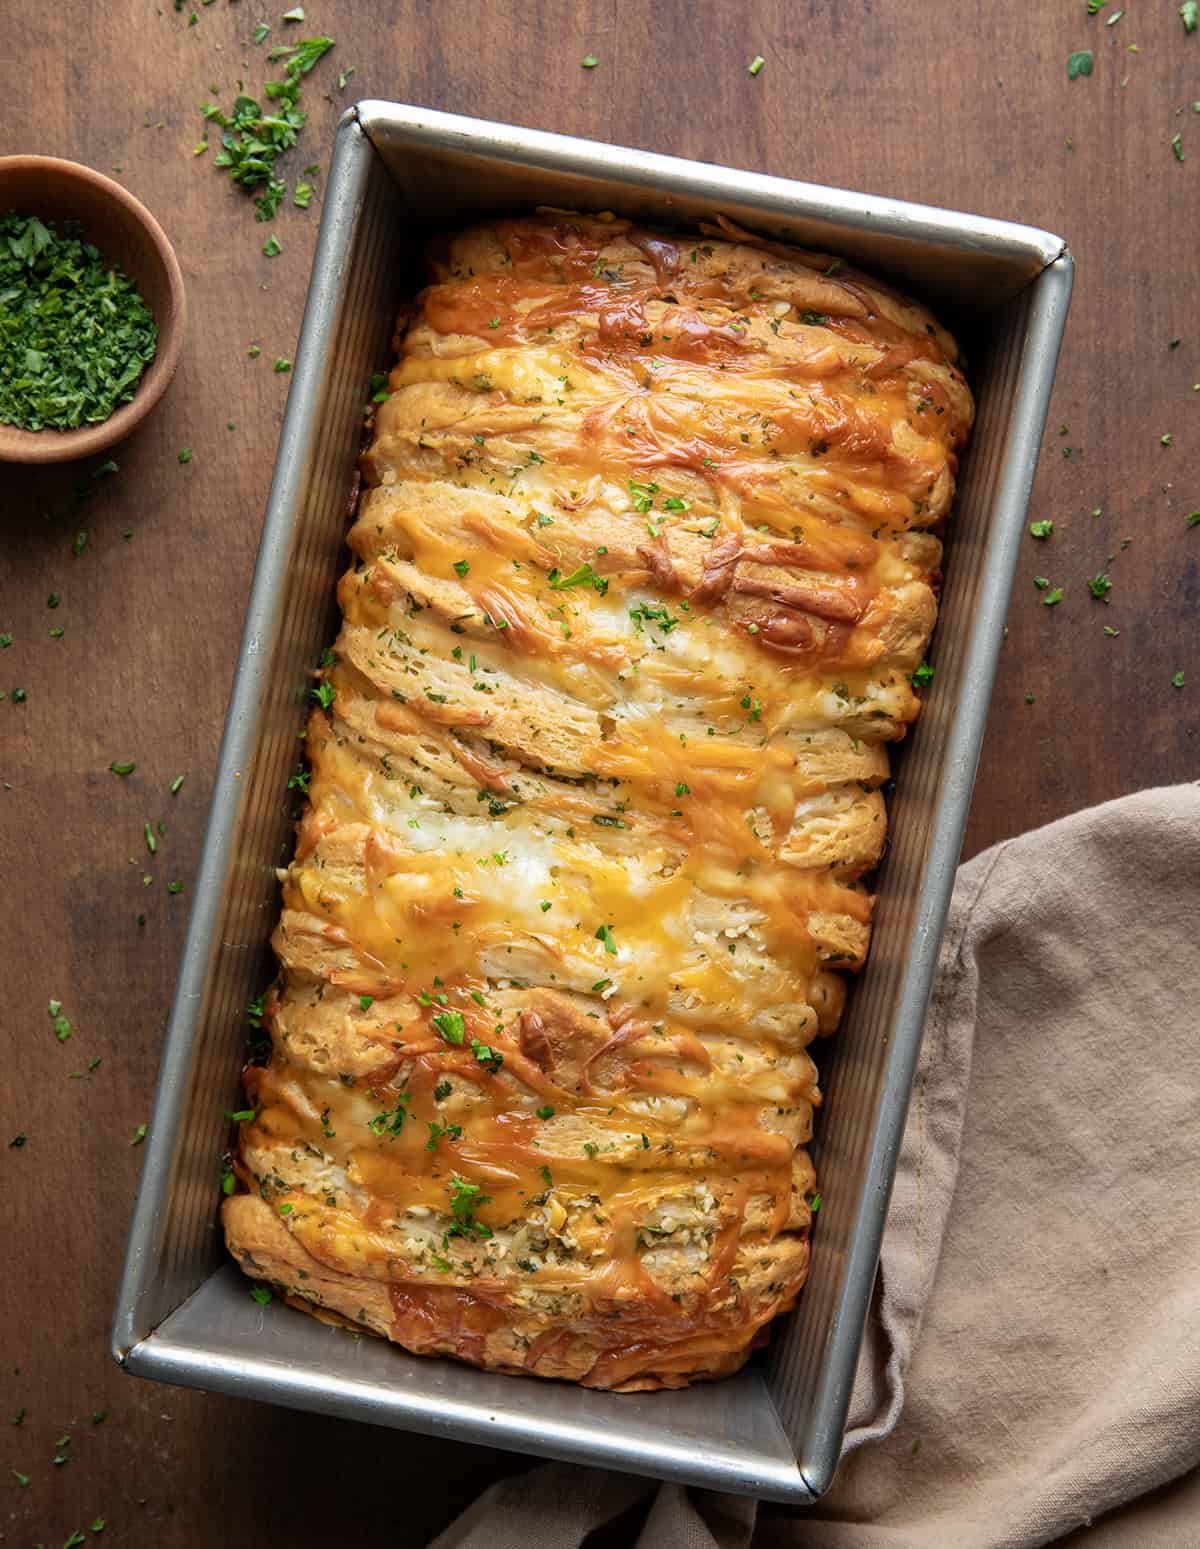 Pan of Cheesy Garlic Pull-Apart Bread on a wooden table from overhead.